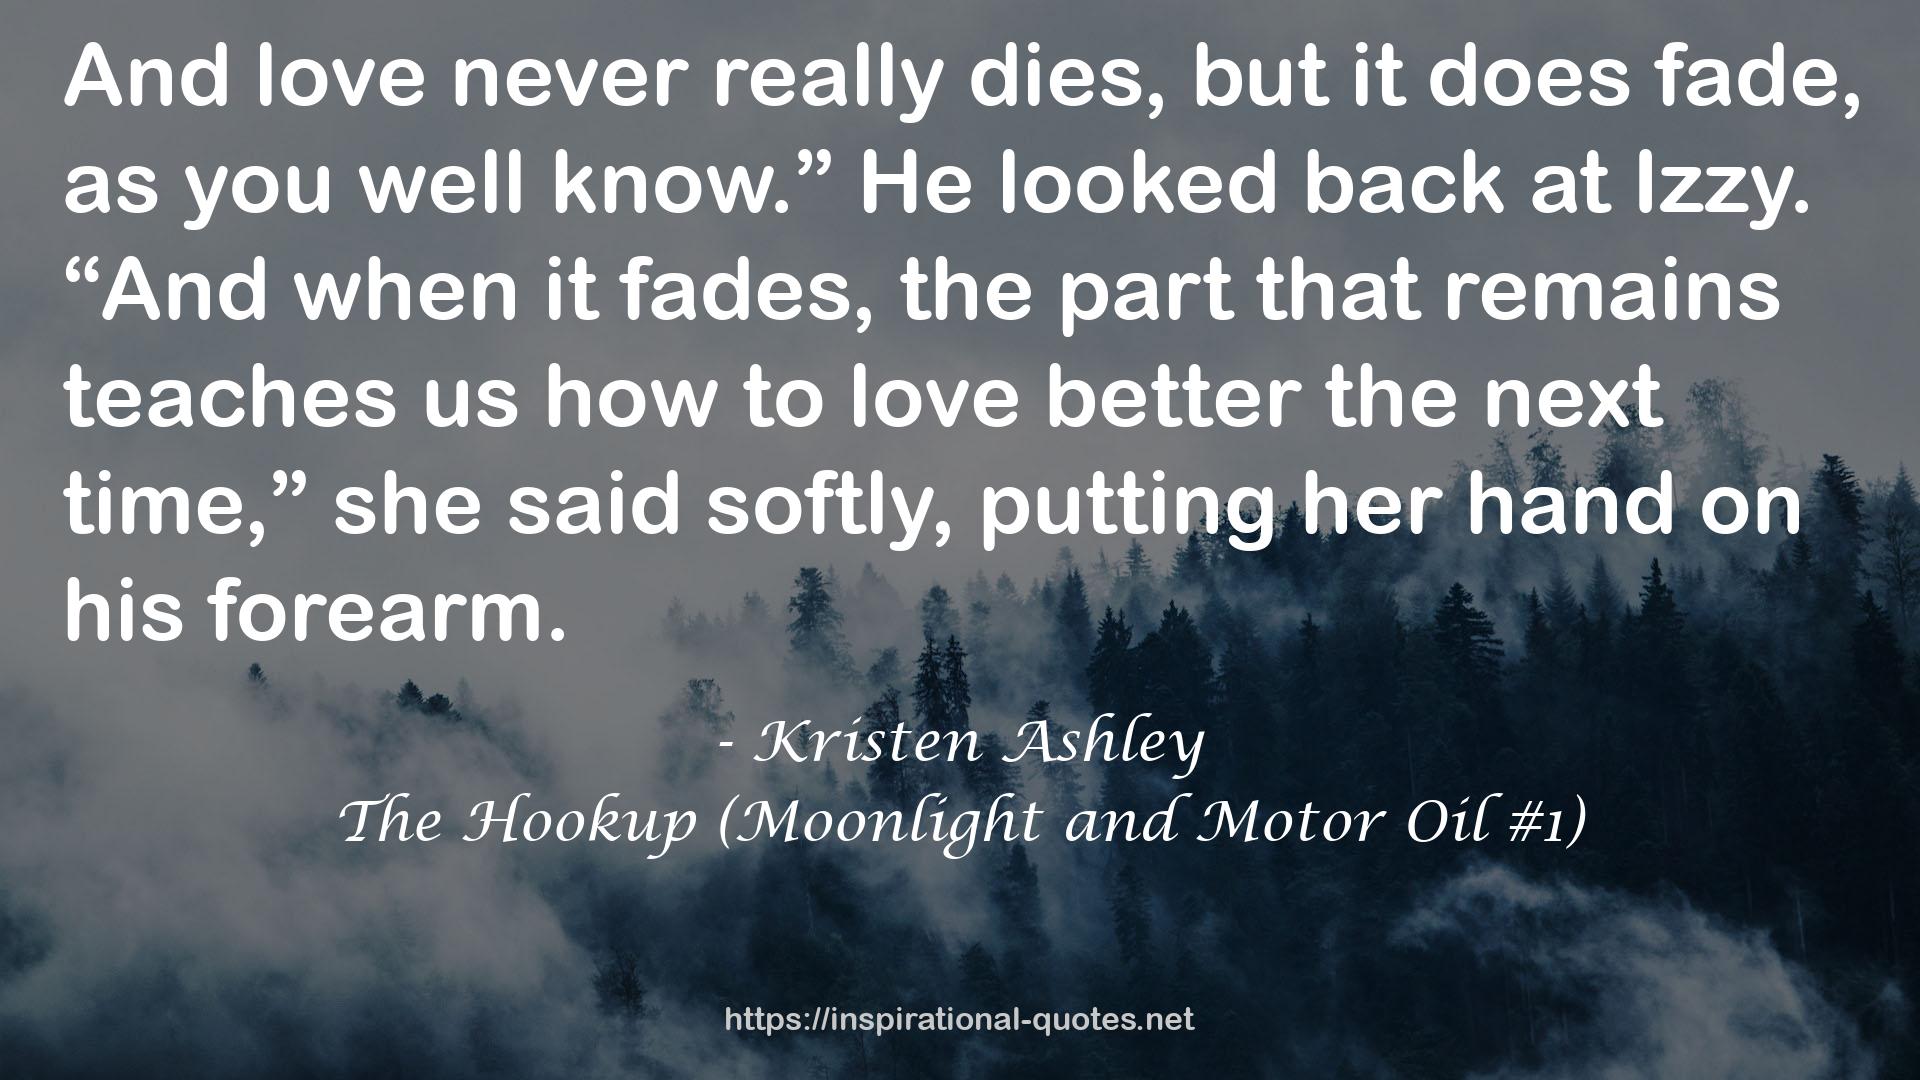 The Hookup (Moonlight and Motor Oil #1) QUOTES